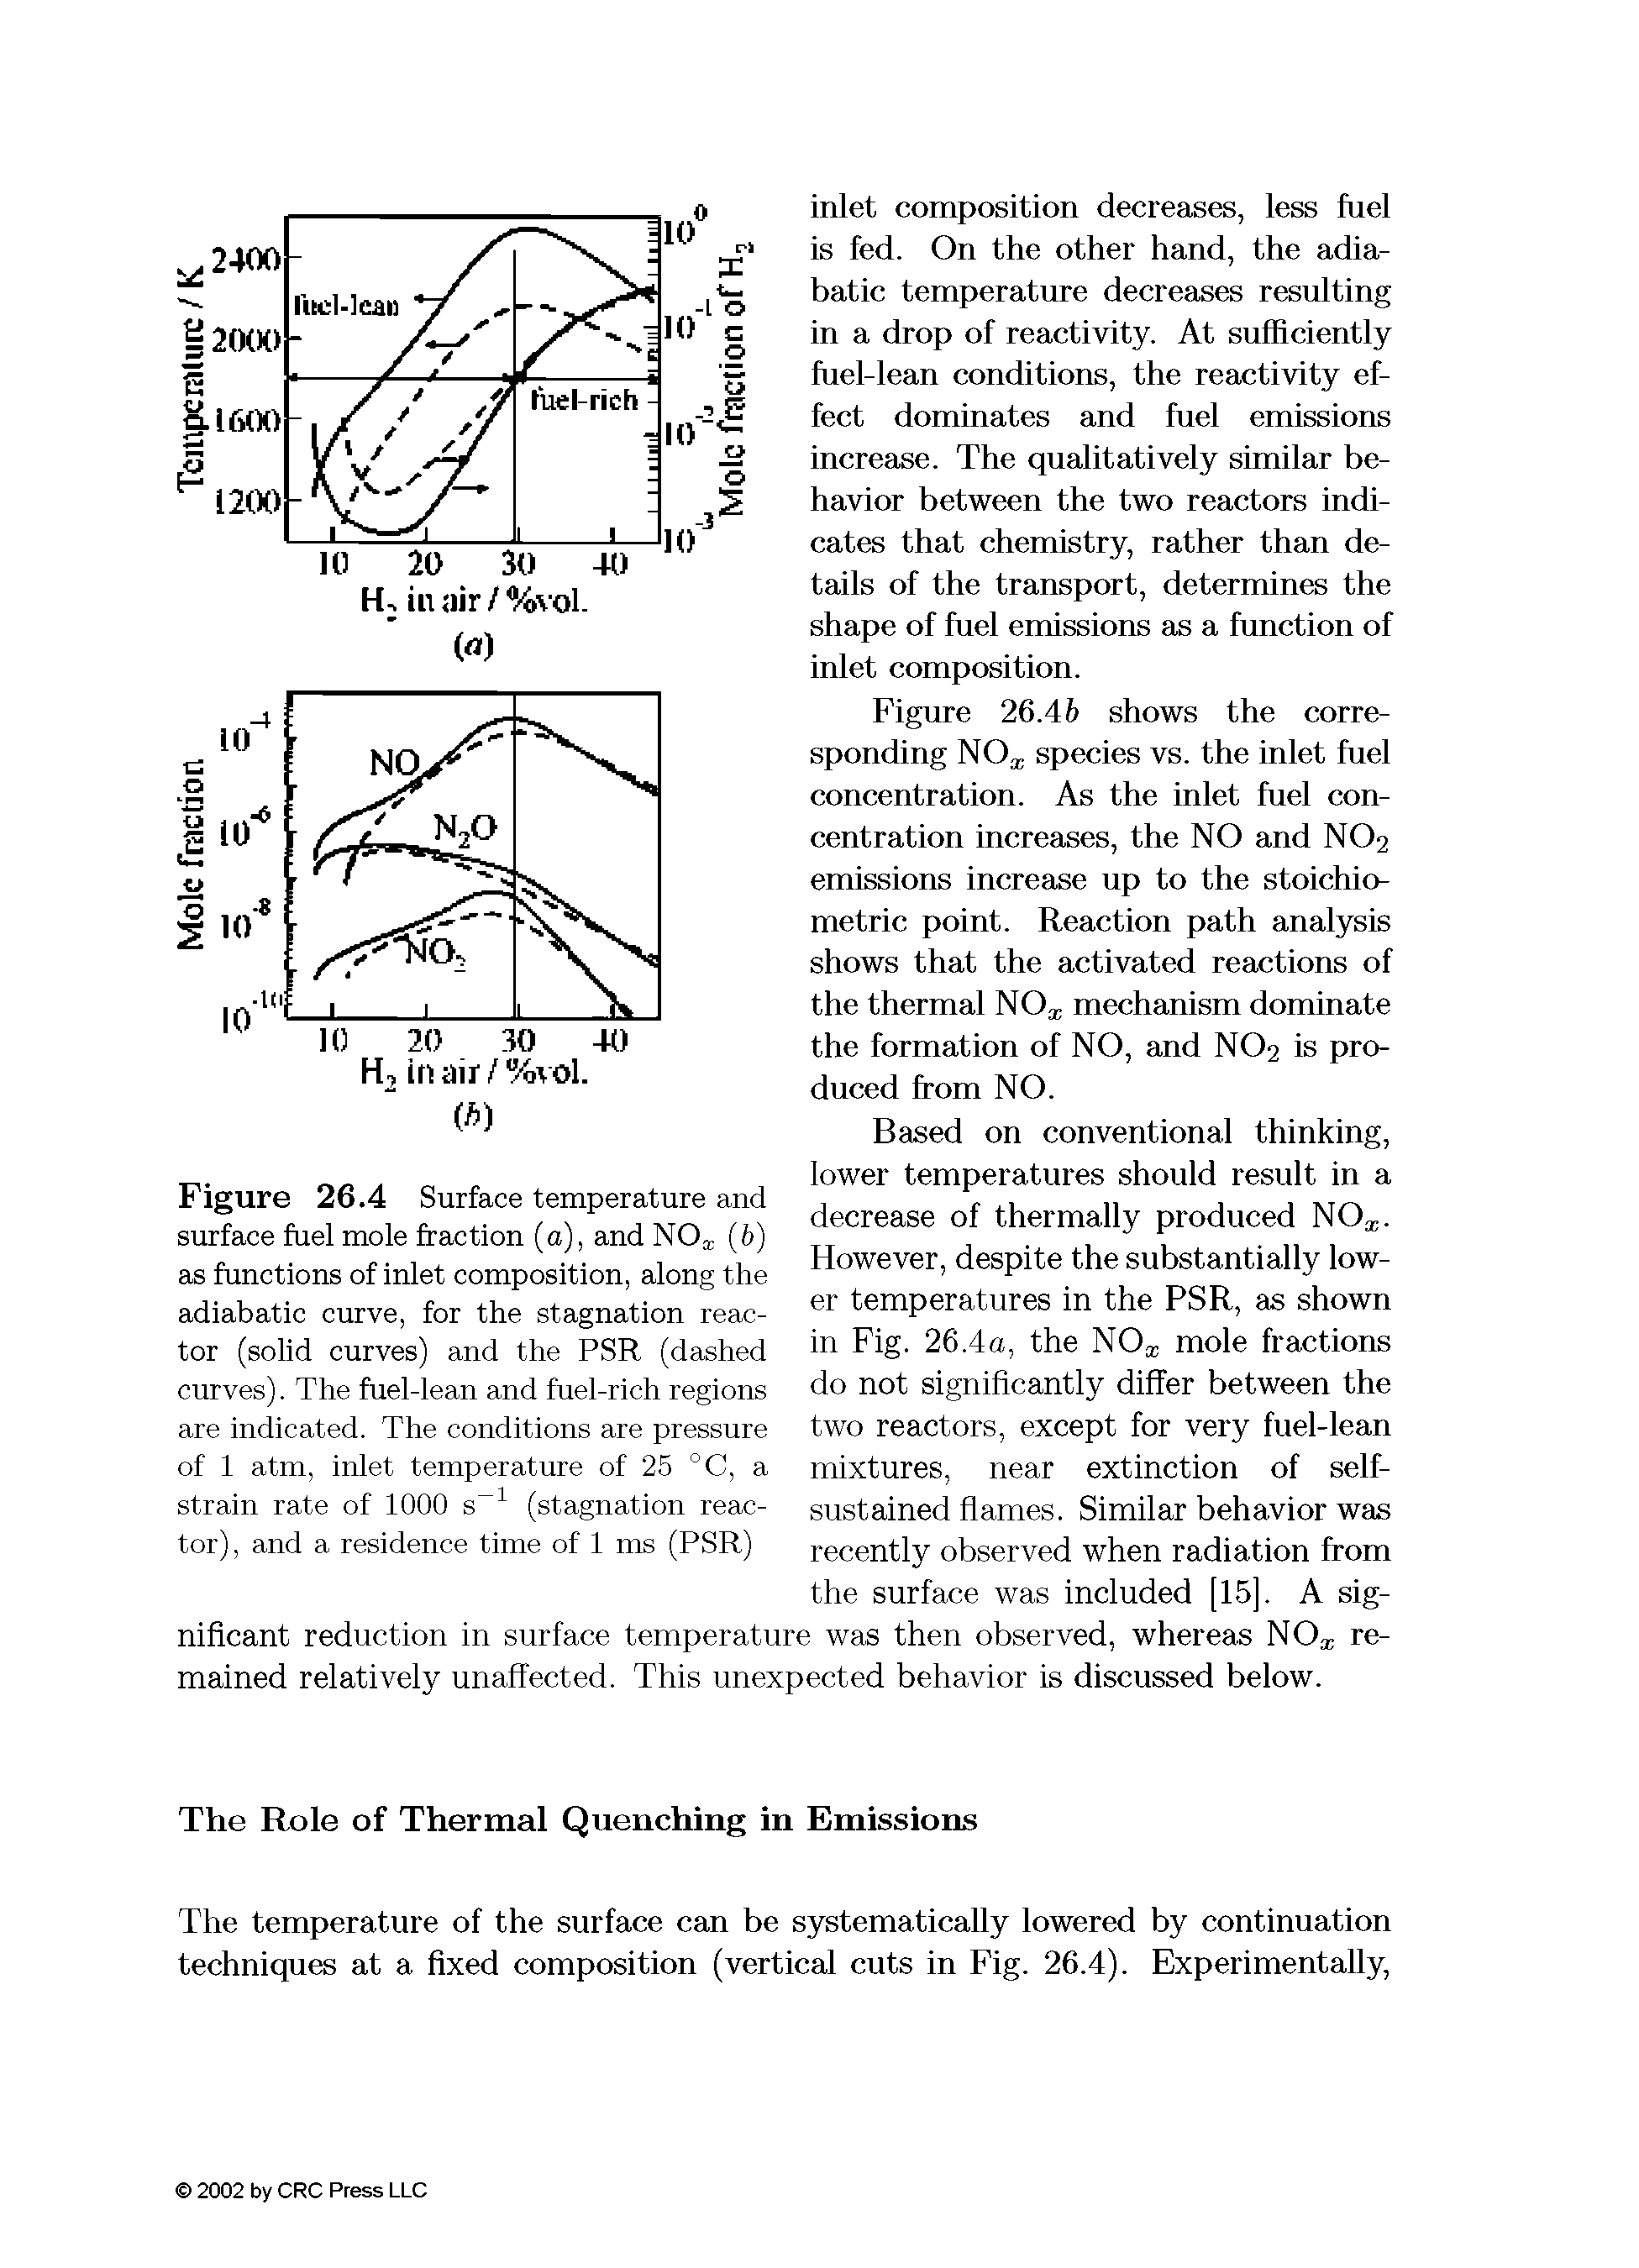 Figure 26.4 Surface temperature and surface fuel mole fraction (a), and NO (6) as functions of inlet composition, along the adiabatic curve, for the stagnation reactor (solid curves) and the PSR (dashed curves). The fuel-lean and fuel-rich regions are indicated. The conditions are pressure of 1 atm, inlet temperature of 25 °C, a strain rate of 1000 s (stagnation reactor), and a residence time of 1 ms (PSR)...